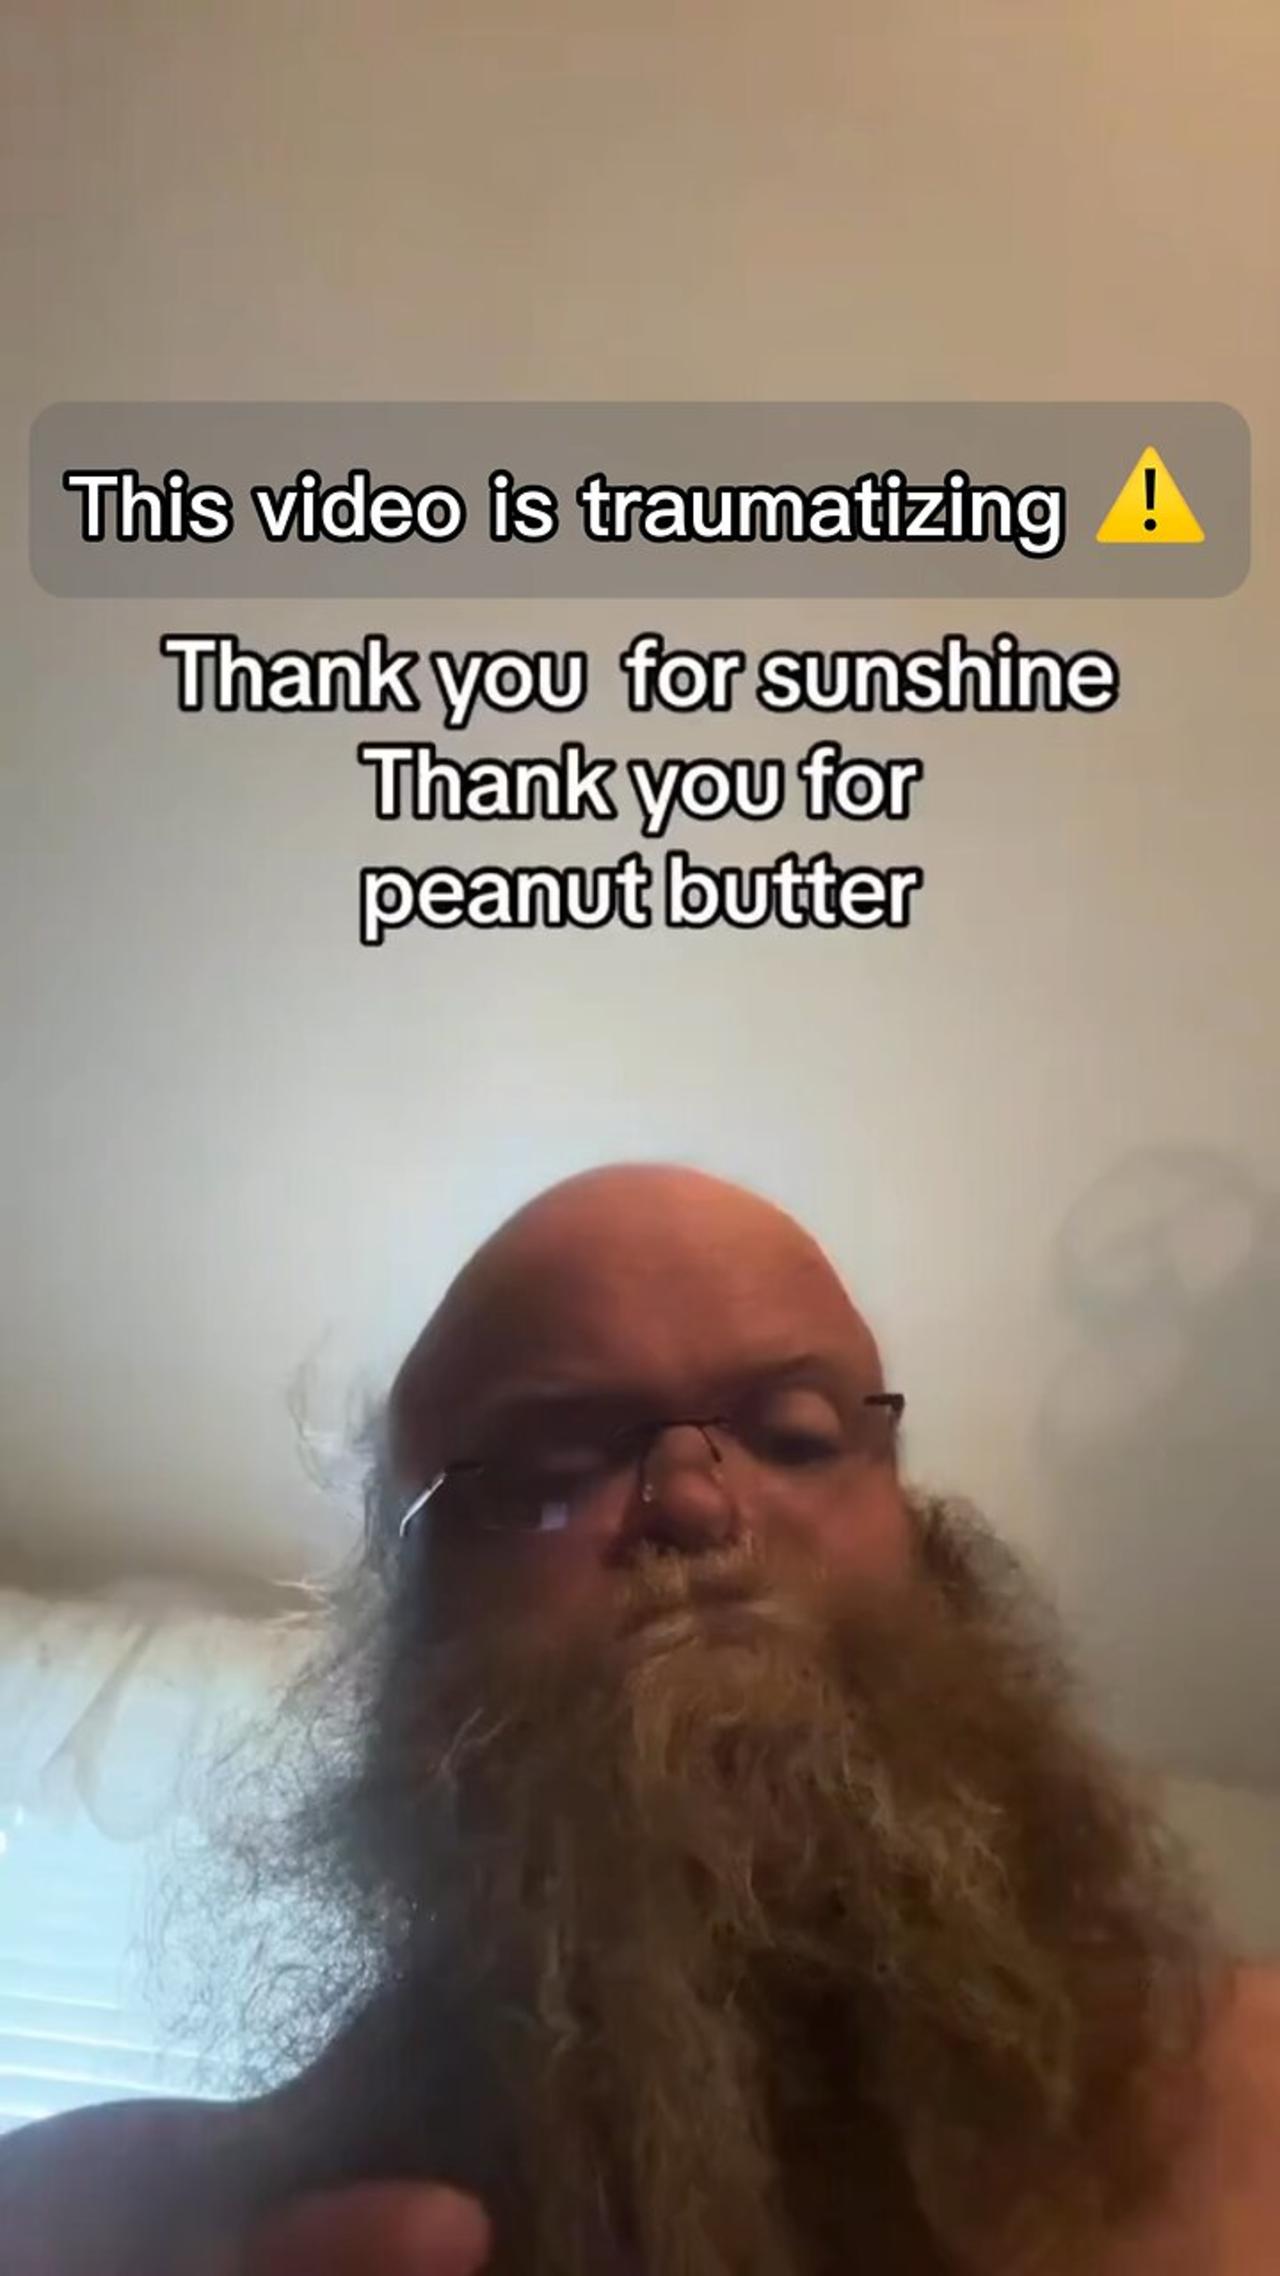 Really said thank you for peanut butter